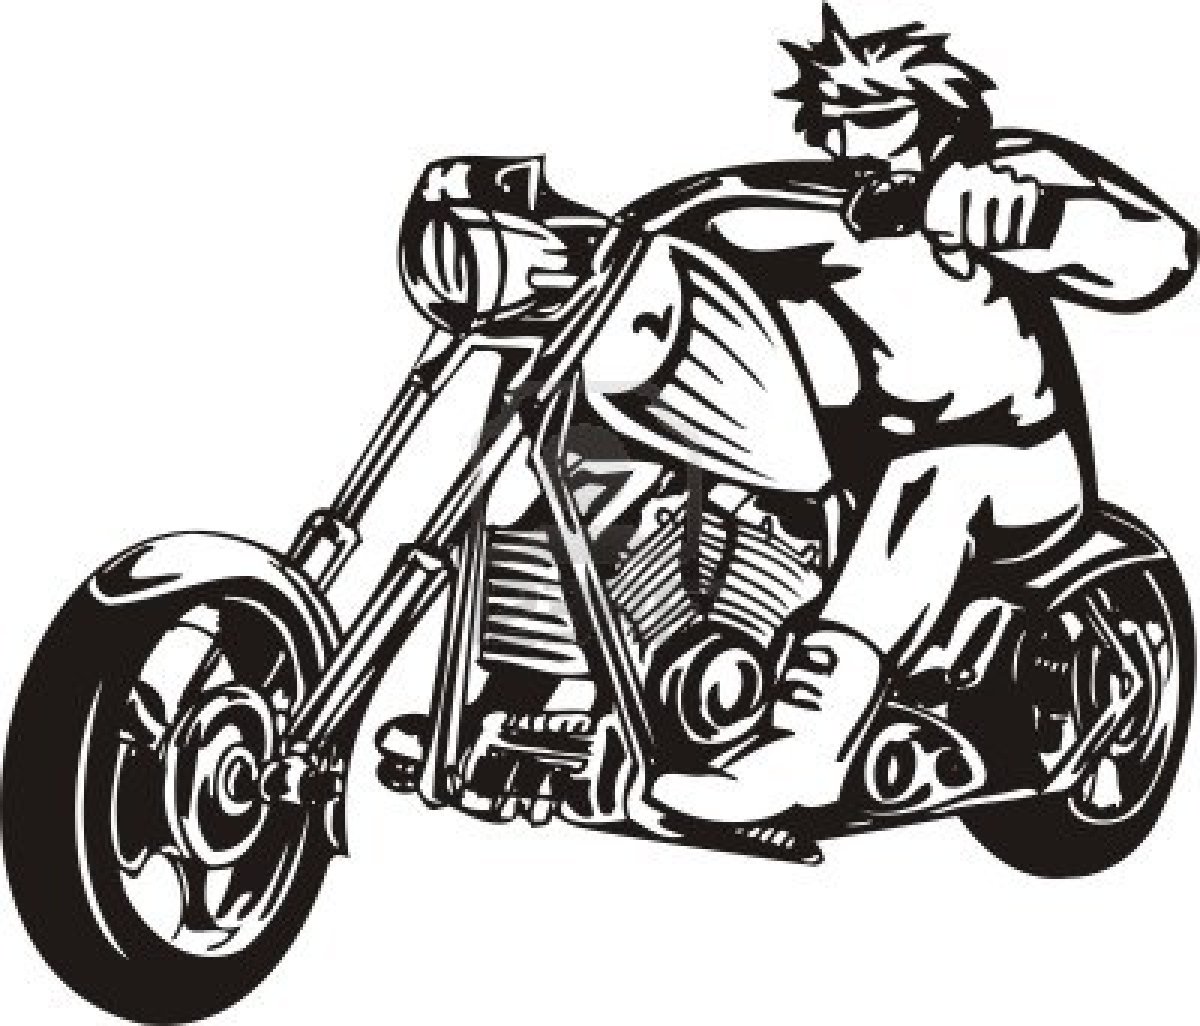 Motorcycle clipart harley